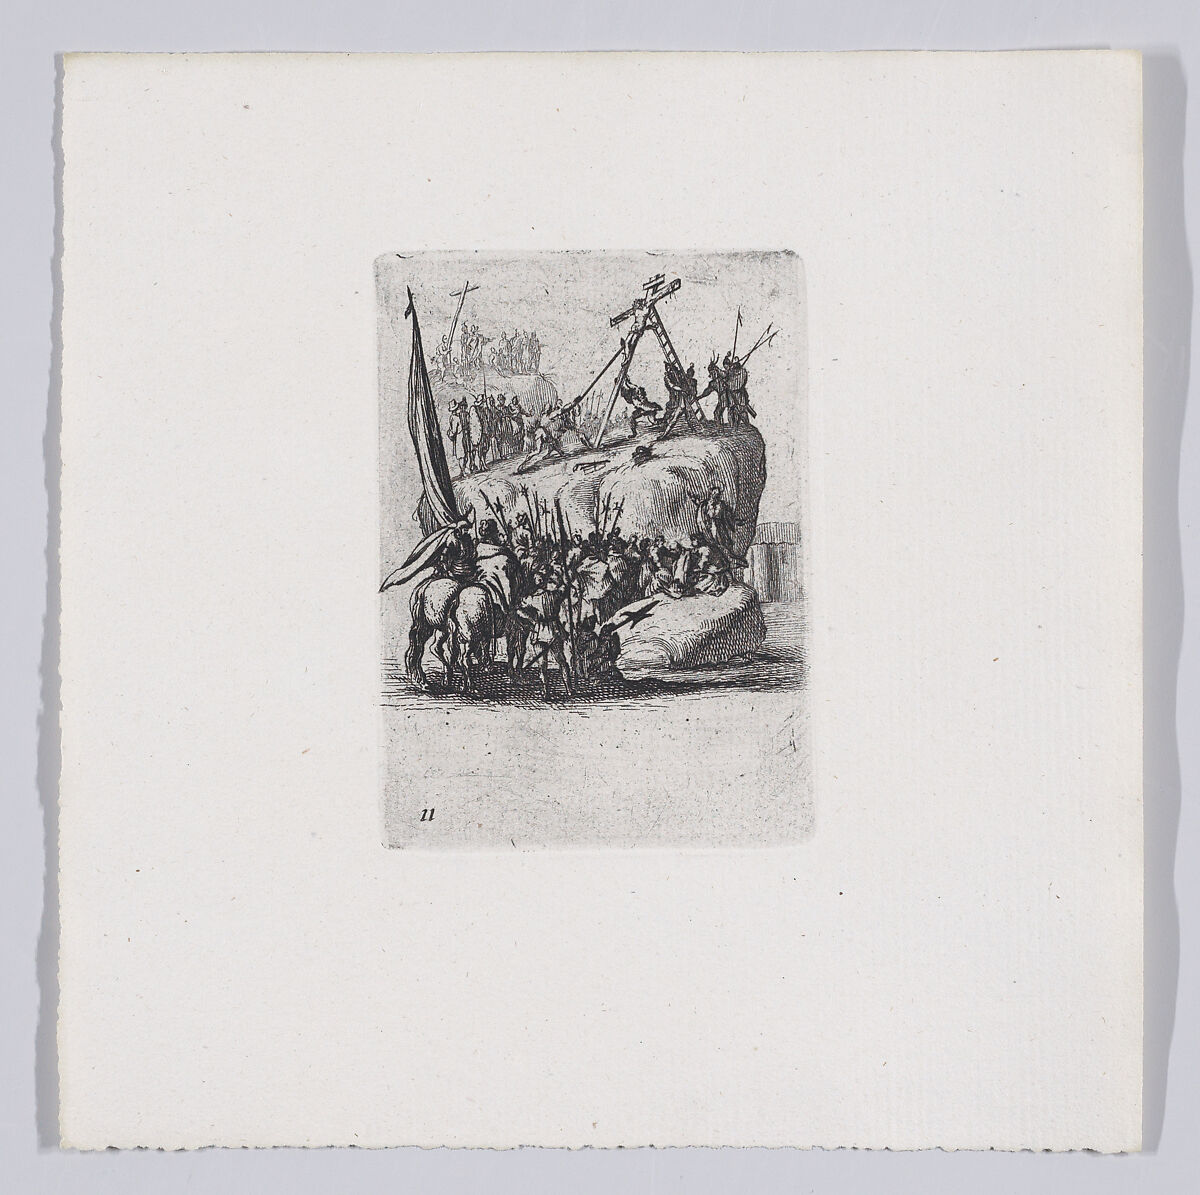 Reverse Copy of Le Crucifiement (The Crucifixion), from La Petite Passion (The Little Passion), Anonymous, Etching 